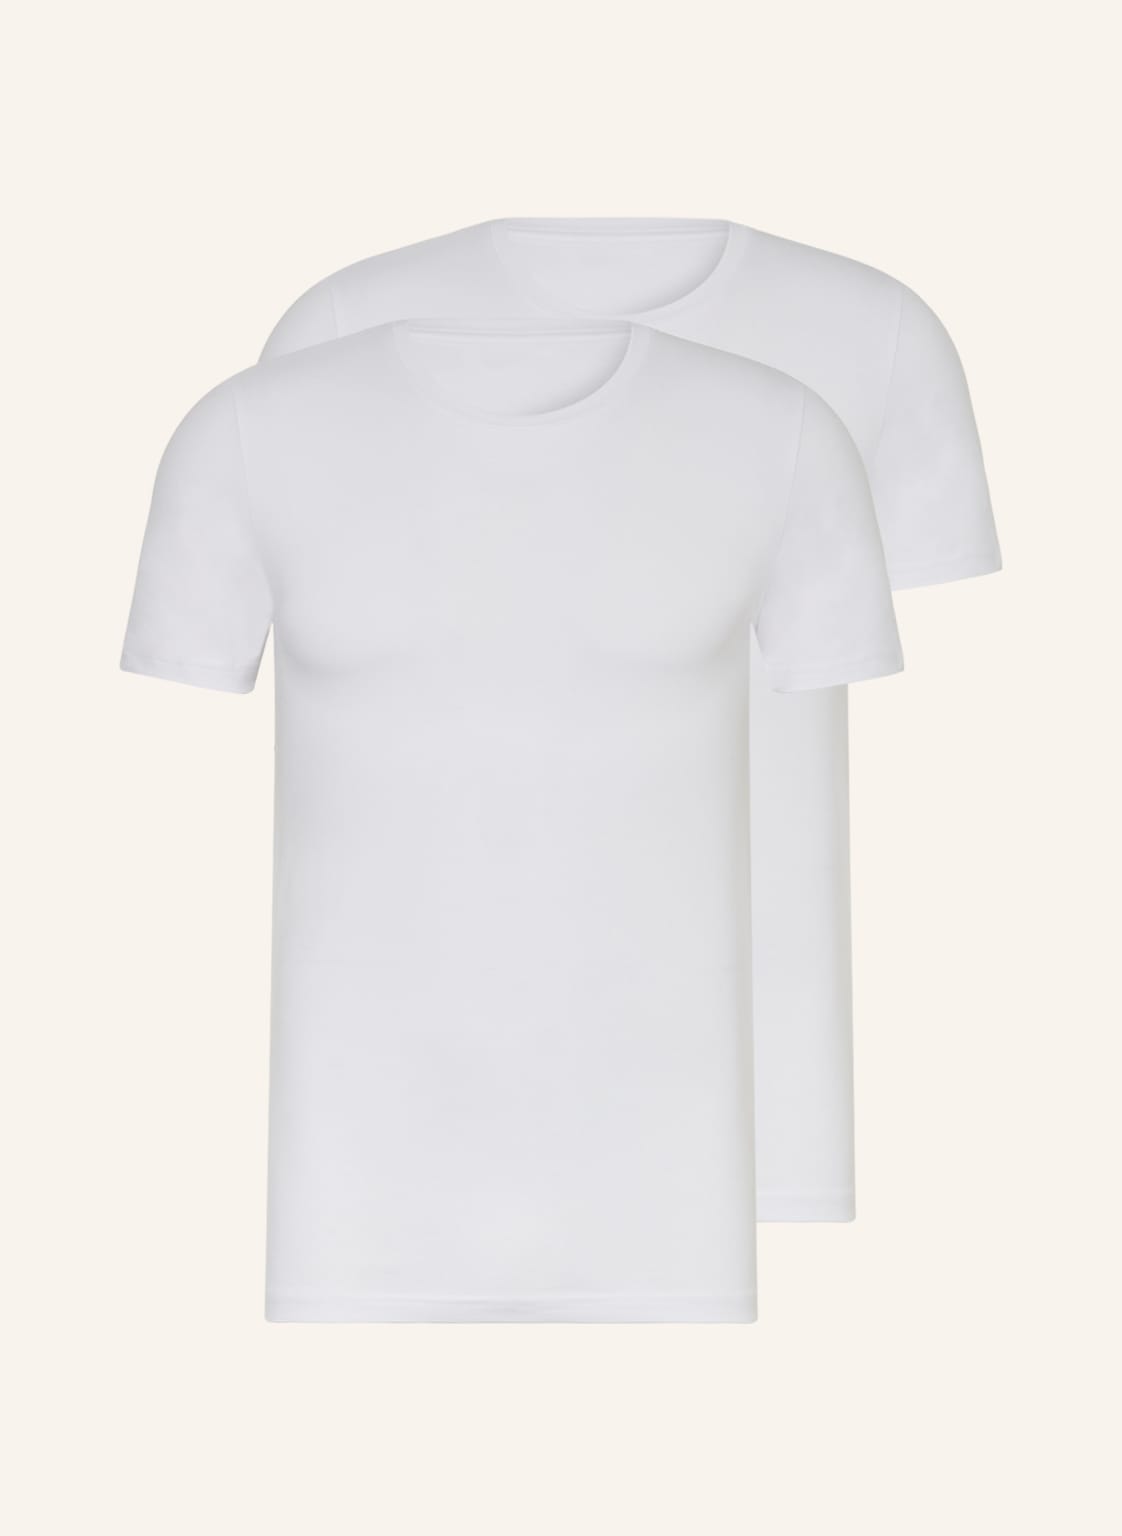 Image of Marc O'polo 2er-Pack T-Shirts Essentials weiss